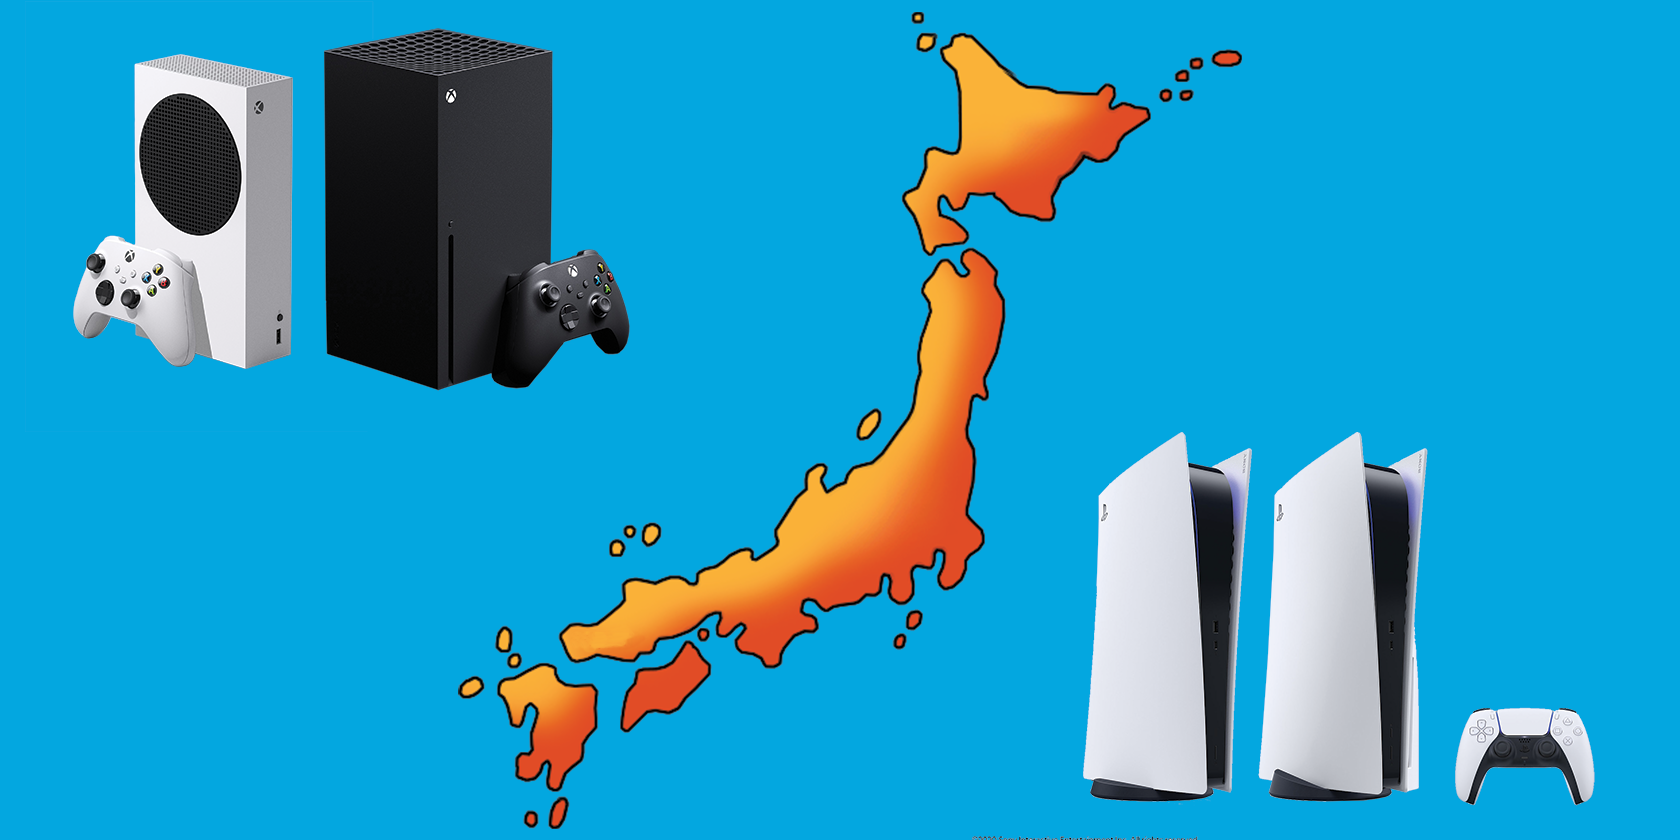 ps5 and xbox series consoles with map of japan